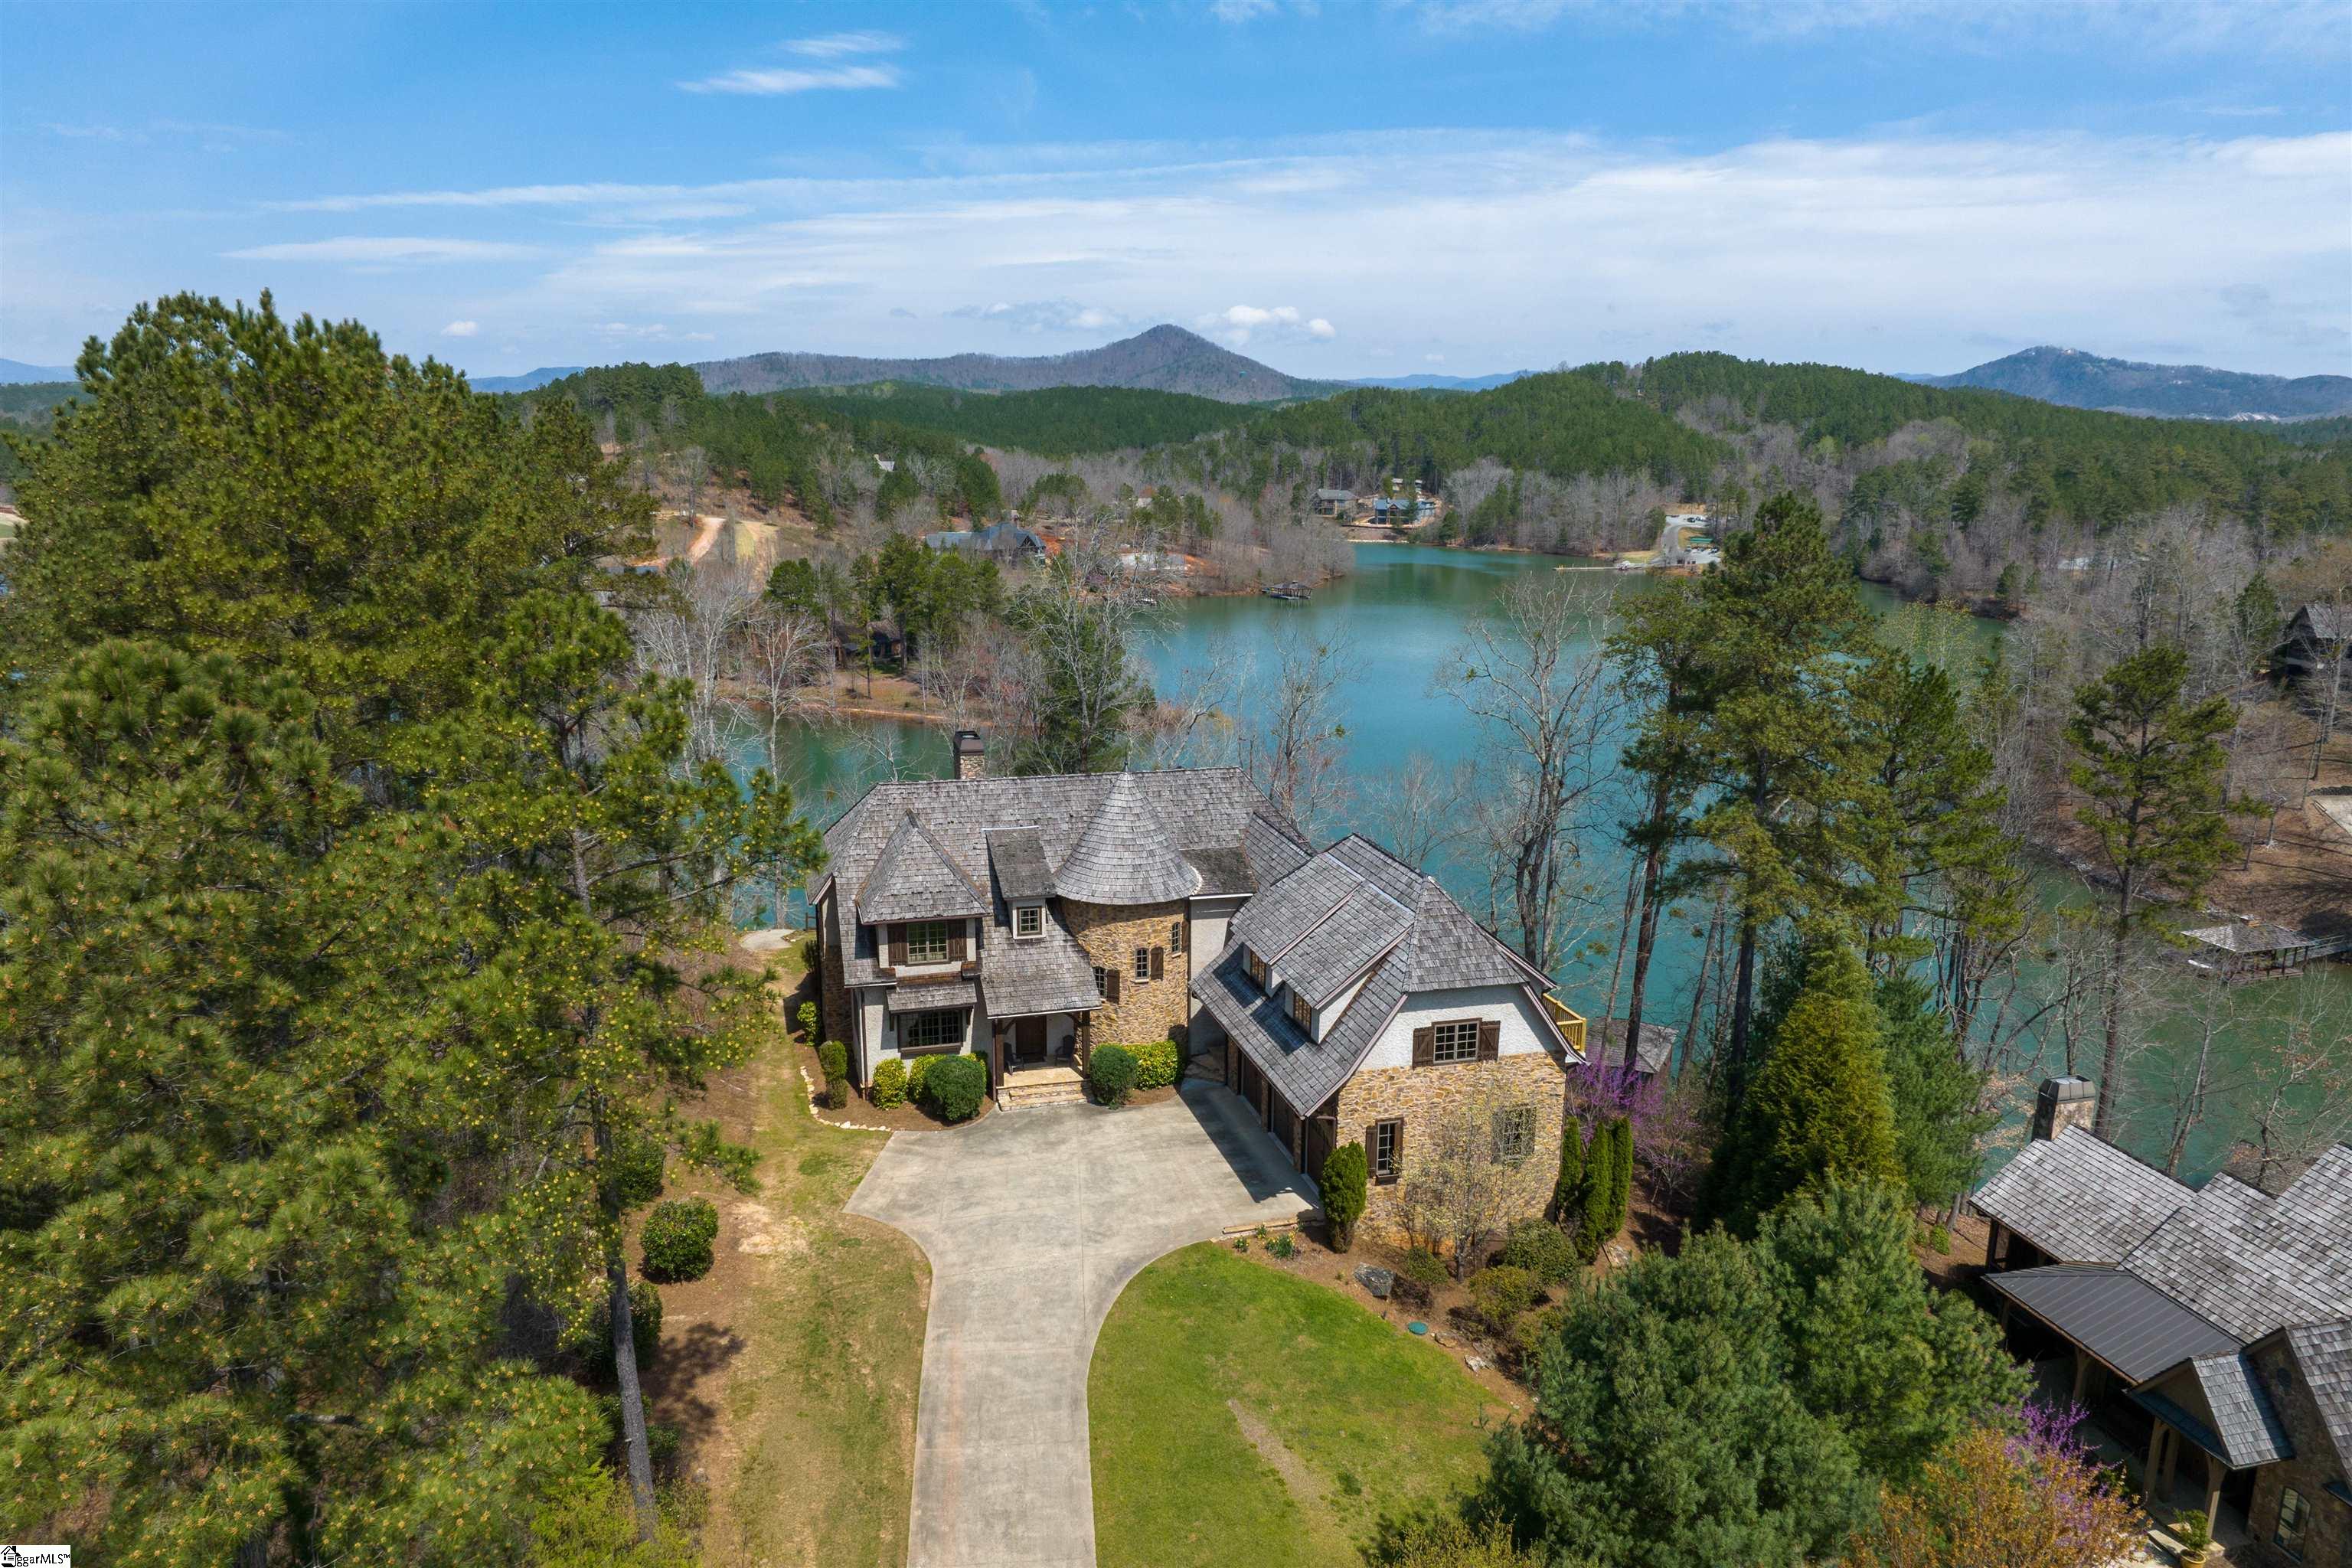 WATERFRONT! Custom waterfront home in Settlement section of the Reserve at Lake Keowee. Covered dock, deep water! LAKE VIEWS from almost every room! Your castle awaits, featuring a stunning winding staircase with domed ceiling inside stone turret which provides access to the upper level. Move in ready, rich wood finishes, high ceilings, half-circle archways, gorgeous floors. Great Room with soaring ceiling and limestone fireplace, the central gathering/entertaining space. Spacious Chef's kitchen with high end appliances and ample prep space with its very own gas log fireplace. Directly off the kitchen, there is access to the covered porch for entertaining overflow. First Floor Master enjoys LAKE VIEWS and access to covered porch. EVERY bedroom has LAKE VIEWS! Bonus: 2-Room Guest Suite above 3 car garage with W/D, beverage fridge and snack bar with private balcony. Office/library with double glass doors. The upper level consists of three bedrooms and two full baths. One of the bedrooms has private access to an open-air flagstone patio that was recently restored; two   bedrooms share access to the adorable Jack-N-Jill bath. There is an interior room with no windows that would be ideal to set up as a media room. Unlimited storage throughout this beautiful home. The Reserve at Lake Keowee is a gated lakefront golf community offering over $100 million in world-class amenities including recently renovated Jack Nicklaus Signature Golf Course, par 3 practice facility with driving range and bar, Clubhouse with fine dining, pub, wine bar, Fitness Center, hiking trails, Tennis & Pickle Ball Courts, Pool and Cabana, Marina and Village Market. The Settlement section has its very own Pool Pavilion/fitness. Premier membership initiation deposit: $60,000 required at closing.